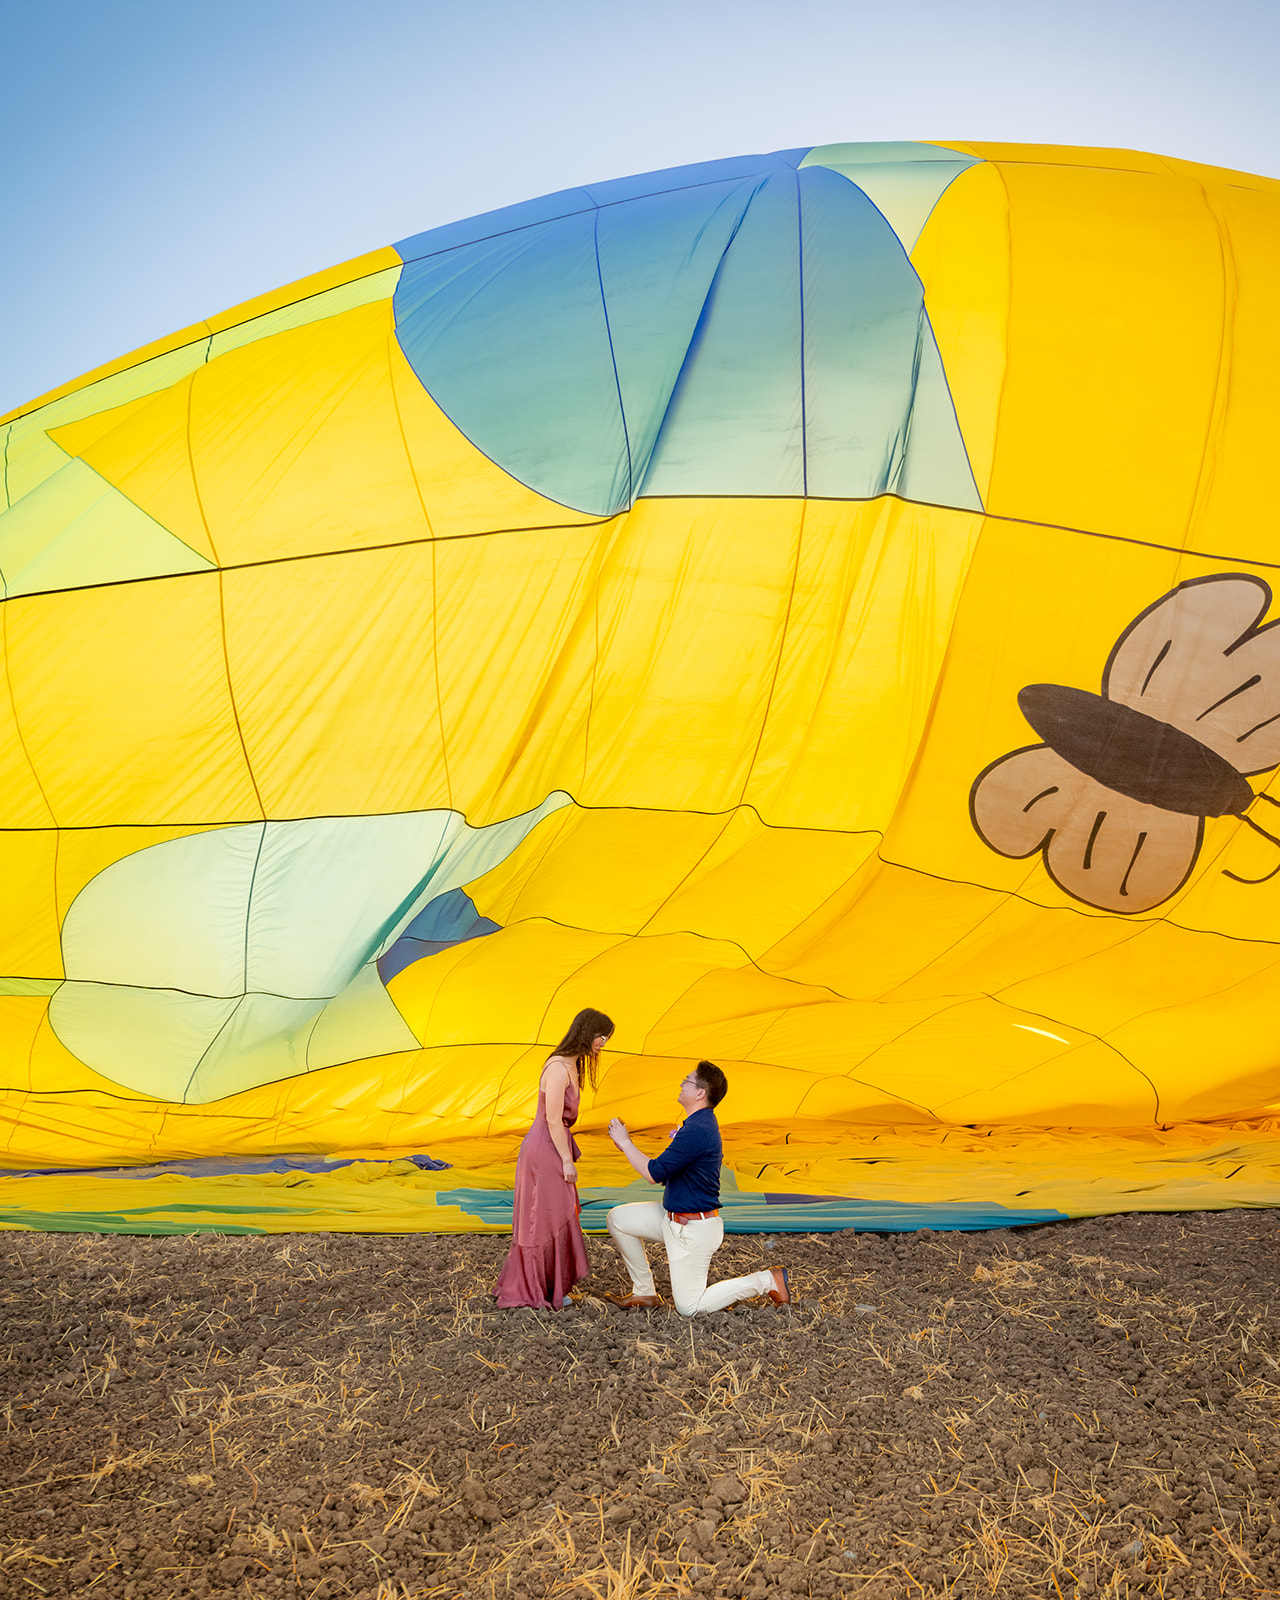 nonbinary person proposing to their girlfriend in front of yellow hot air balloon